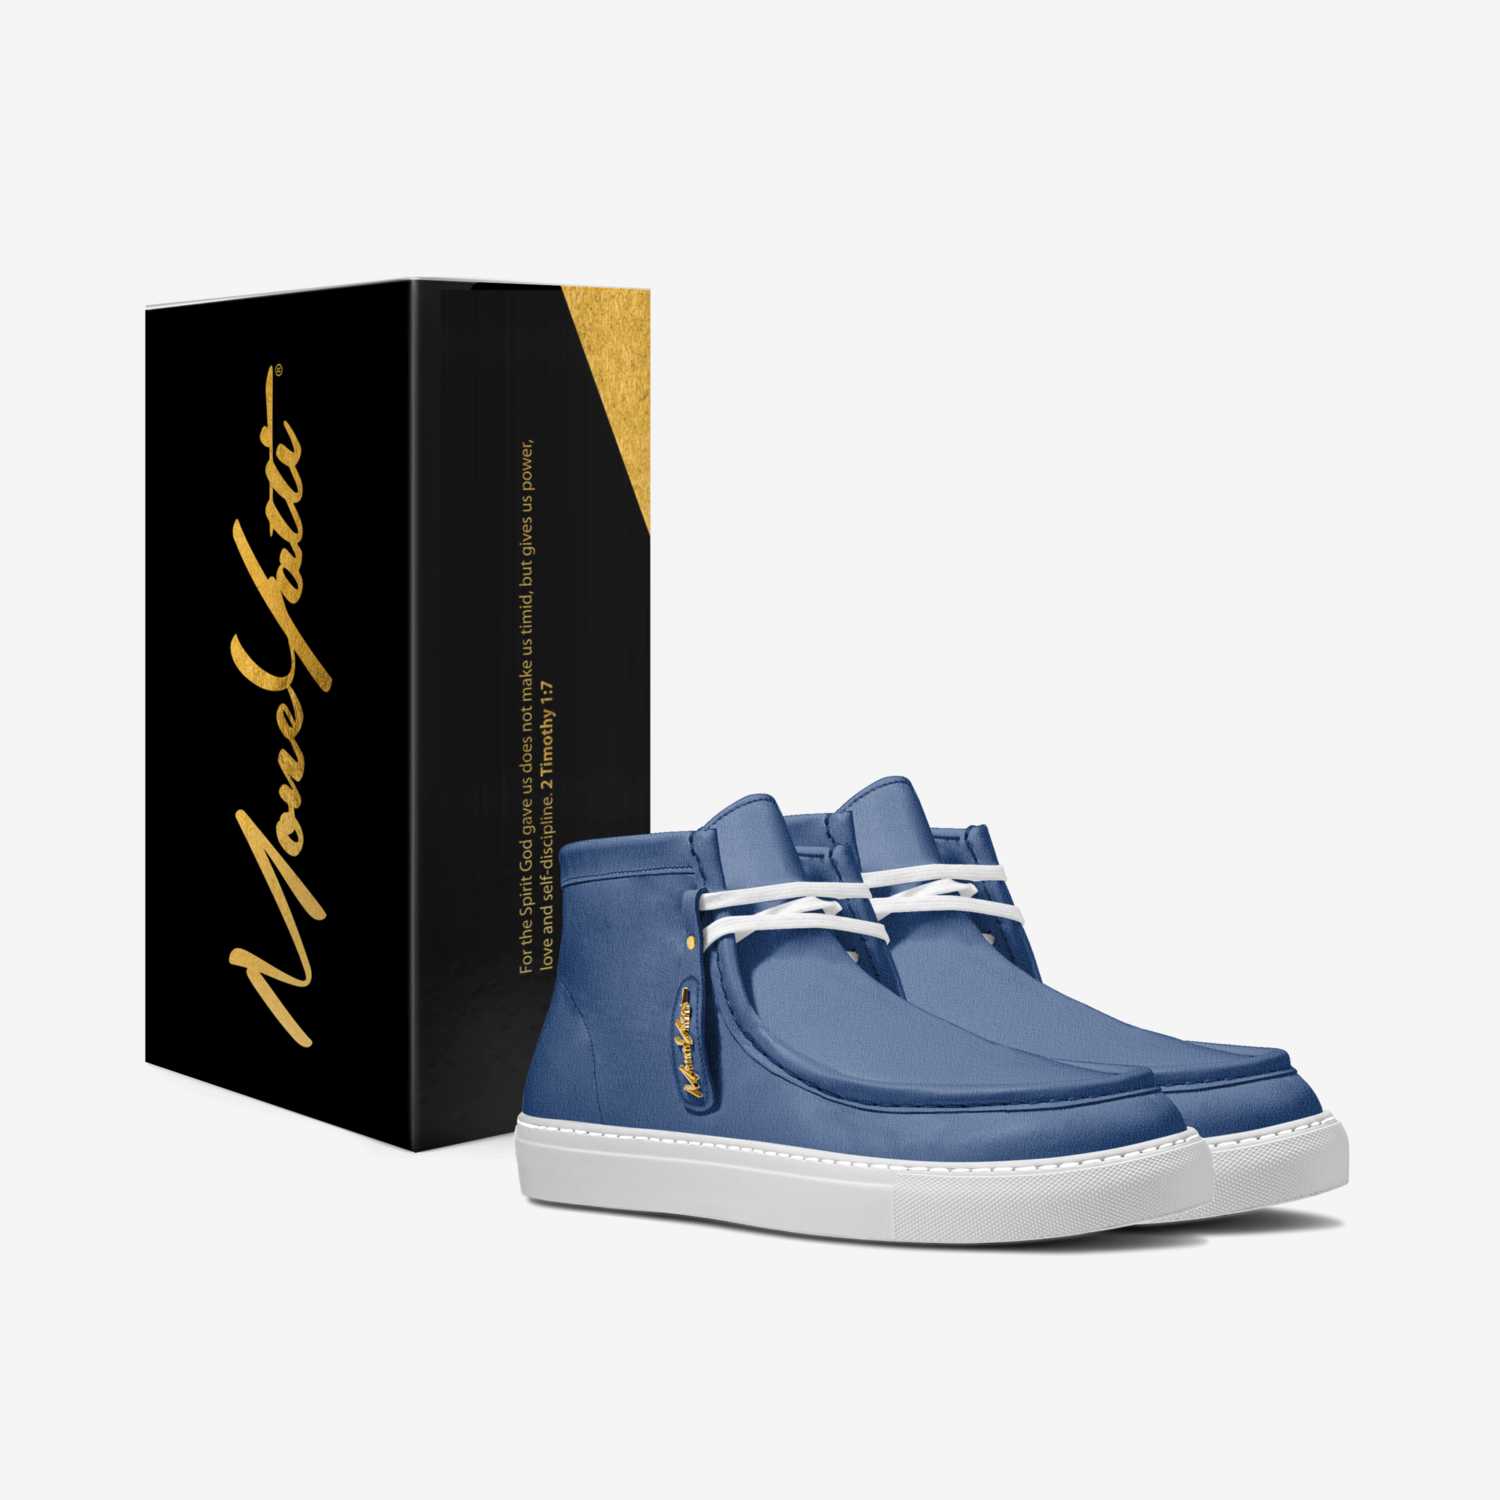 LUX SUEDE 011 custom made in Italy shoes by Moneyatti Brand | Box view